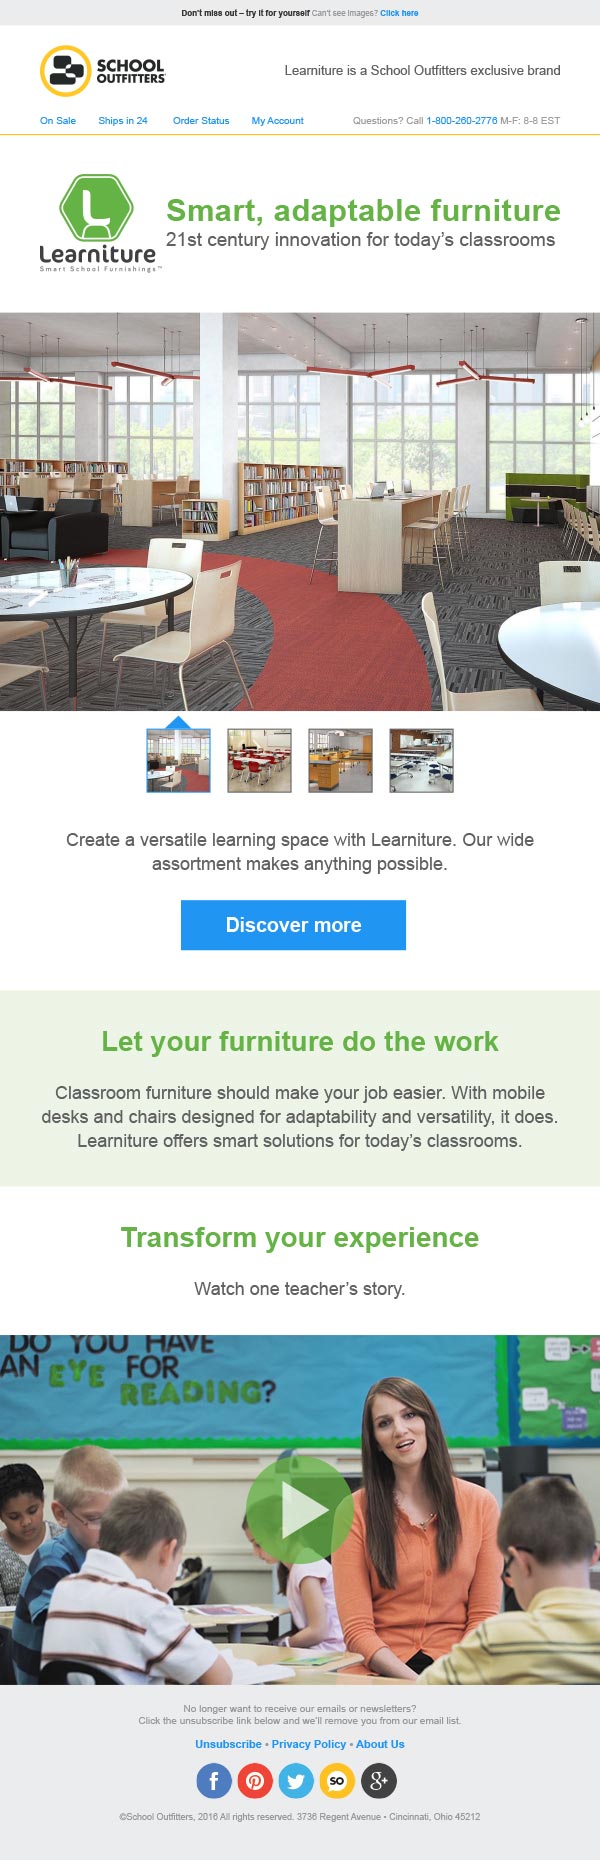 Learniture_Email.jpg